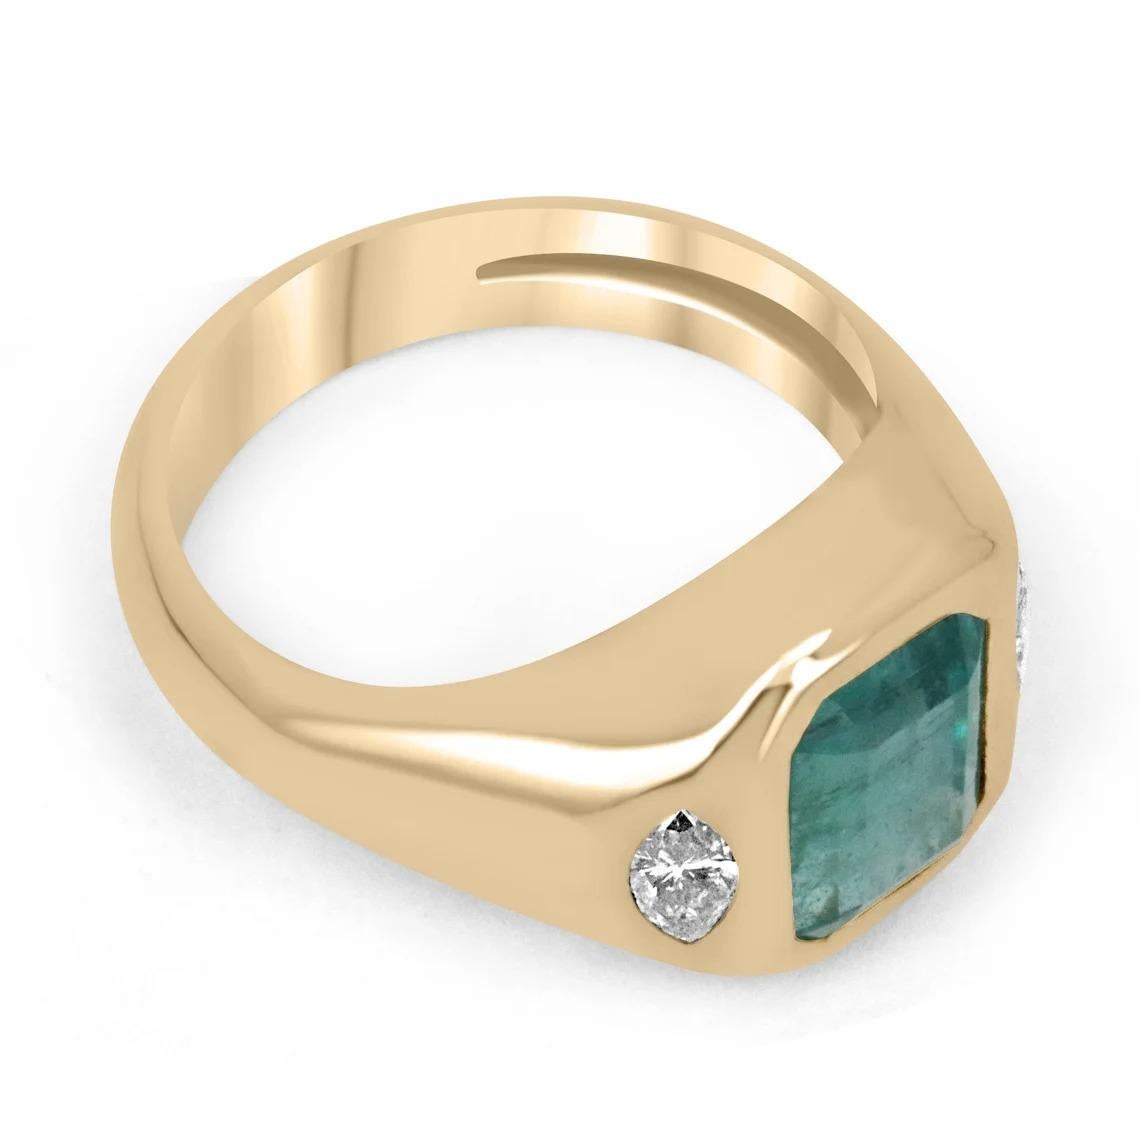 A remarkable emerald and diamond three-stone right-hand/engagement ring. This exceptional custom piece features a gorgeous emerald cut emerald from the origin of Zambia. The gemstone showcases a stunning deep green color, with a tint of bluish-green